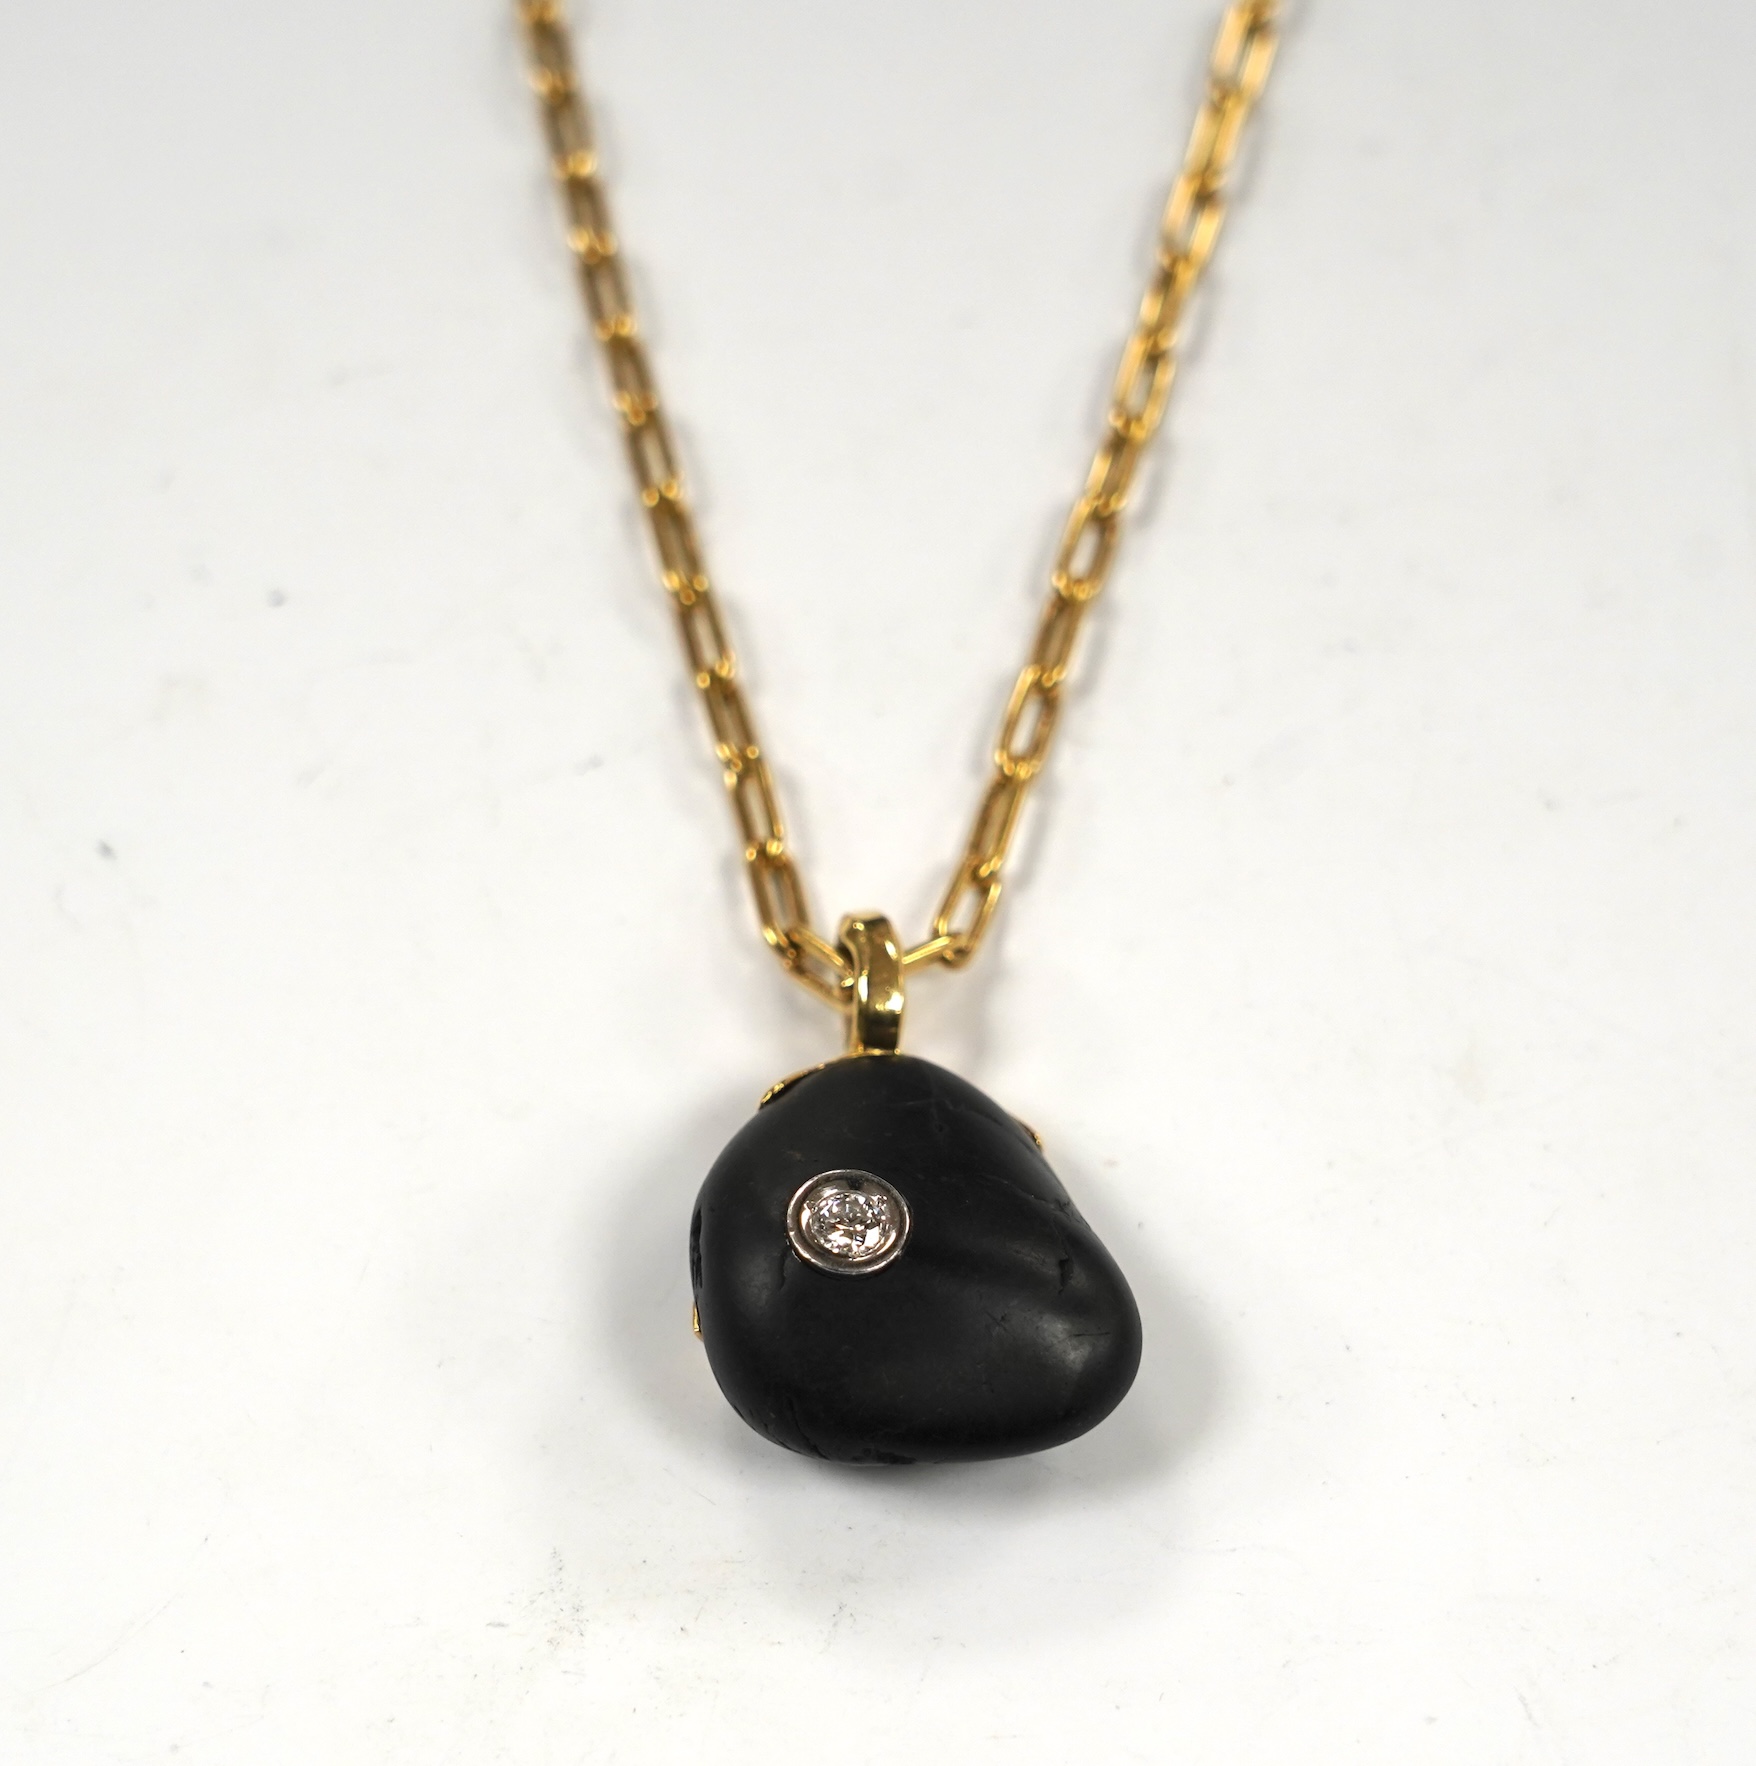 A modern Chou Chou 18k and pt mounted inset diamond pebble? pendant, 38mm overall, on a Chou Chou 18k chain, 62cm, chain weight 27 grams.